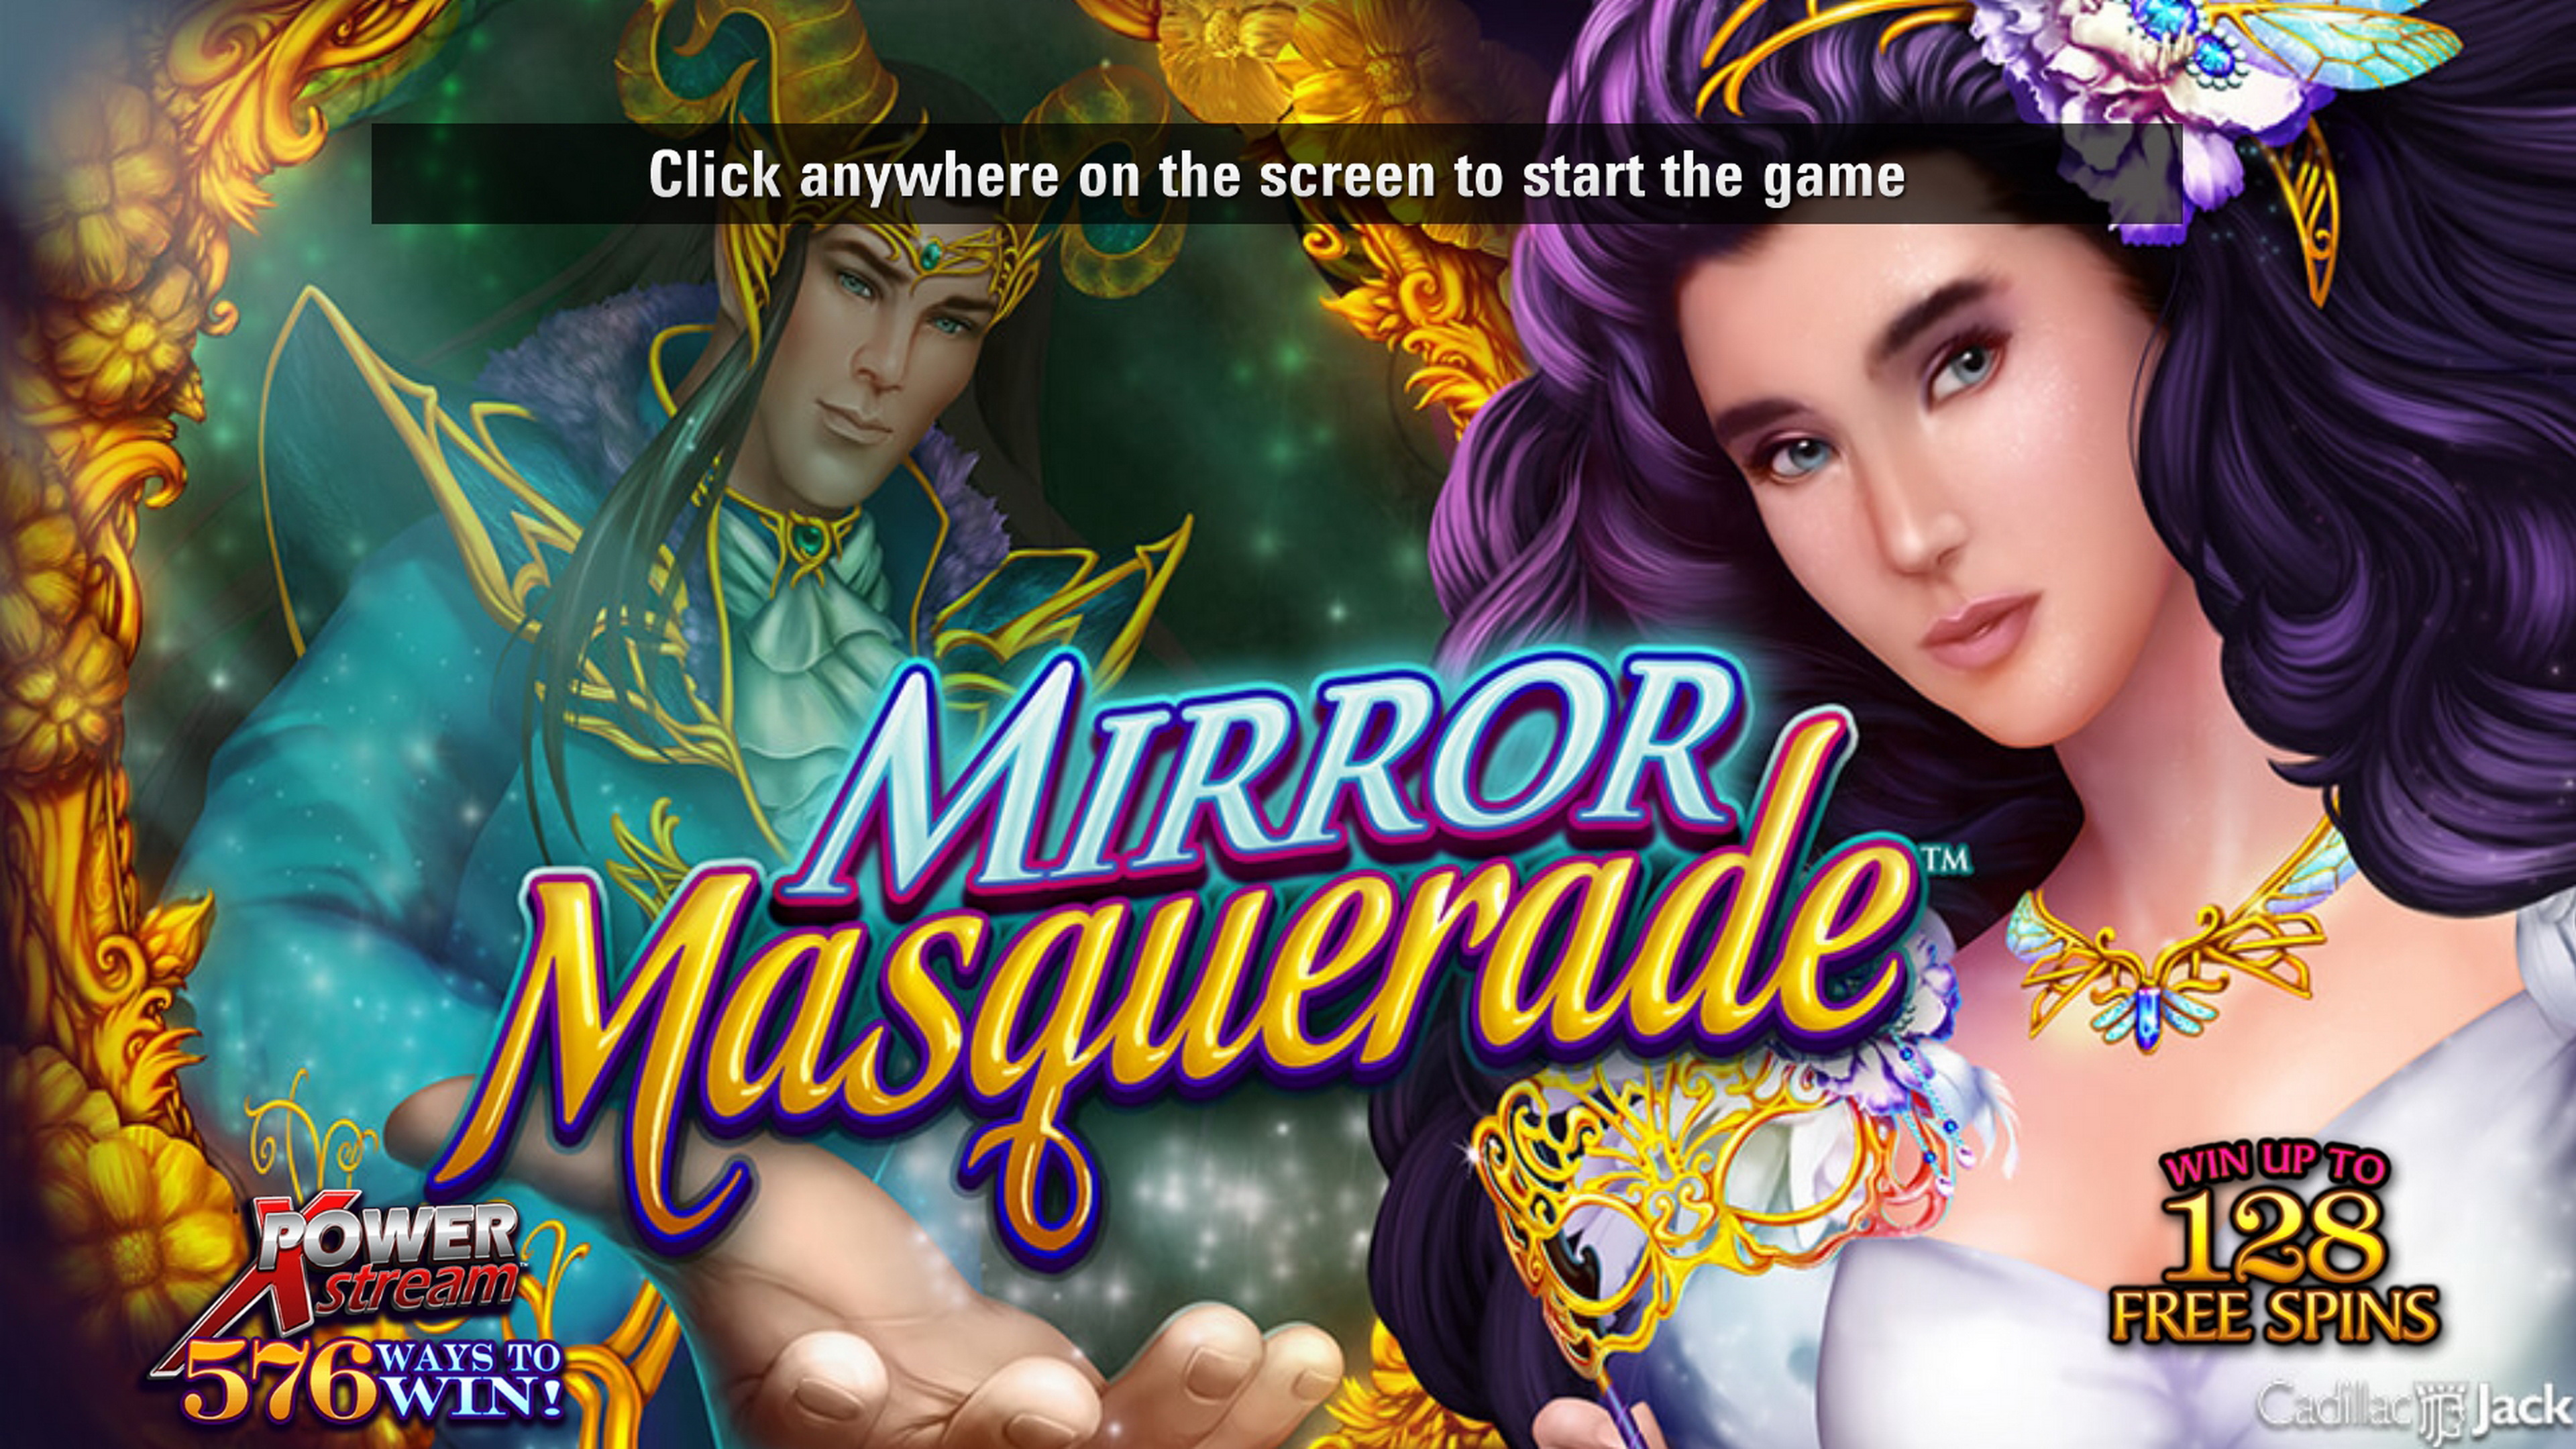 Play Mirror Masquerade Free Casino Slot Game by AGS